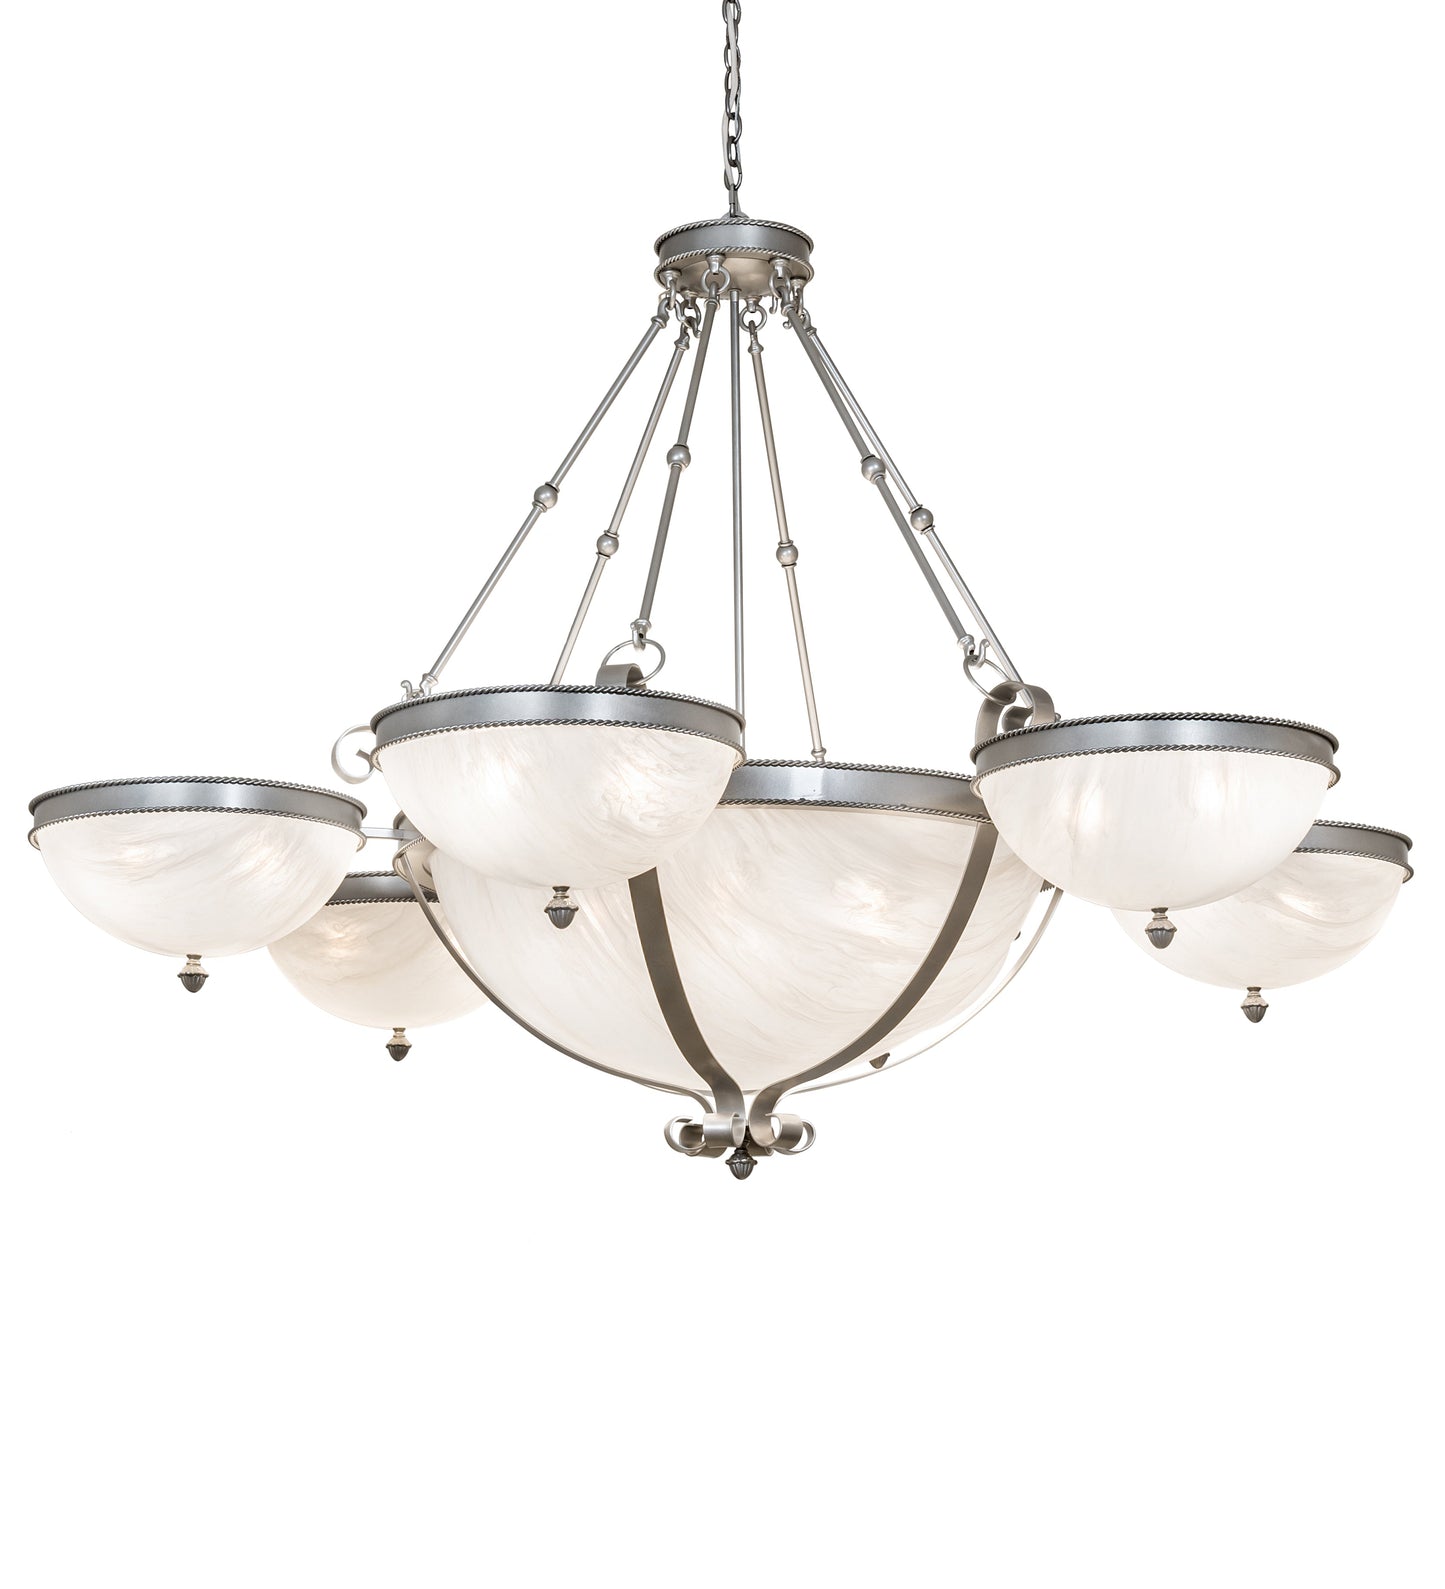 72" Alonzo Chandelier by 2nd Ave Lighting